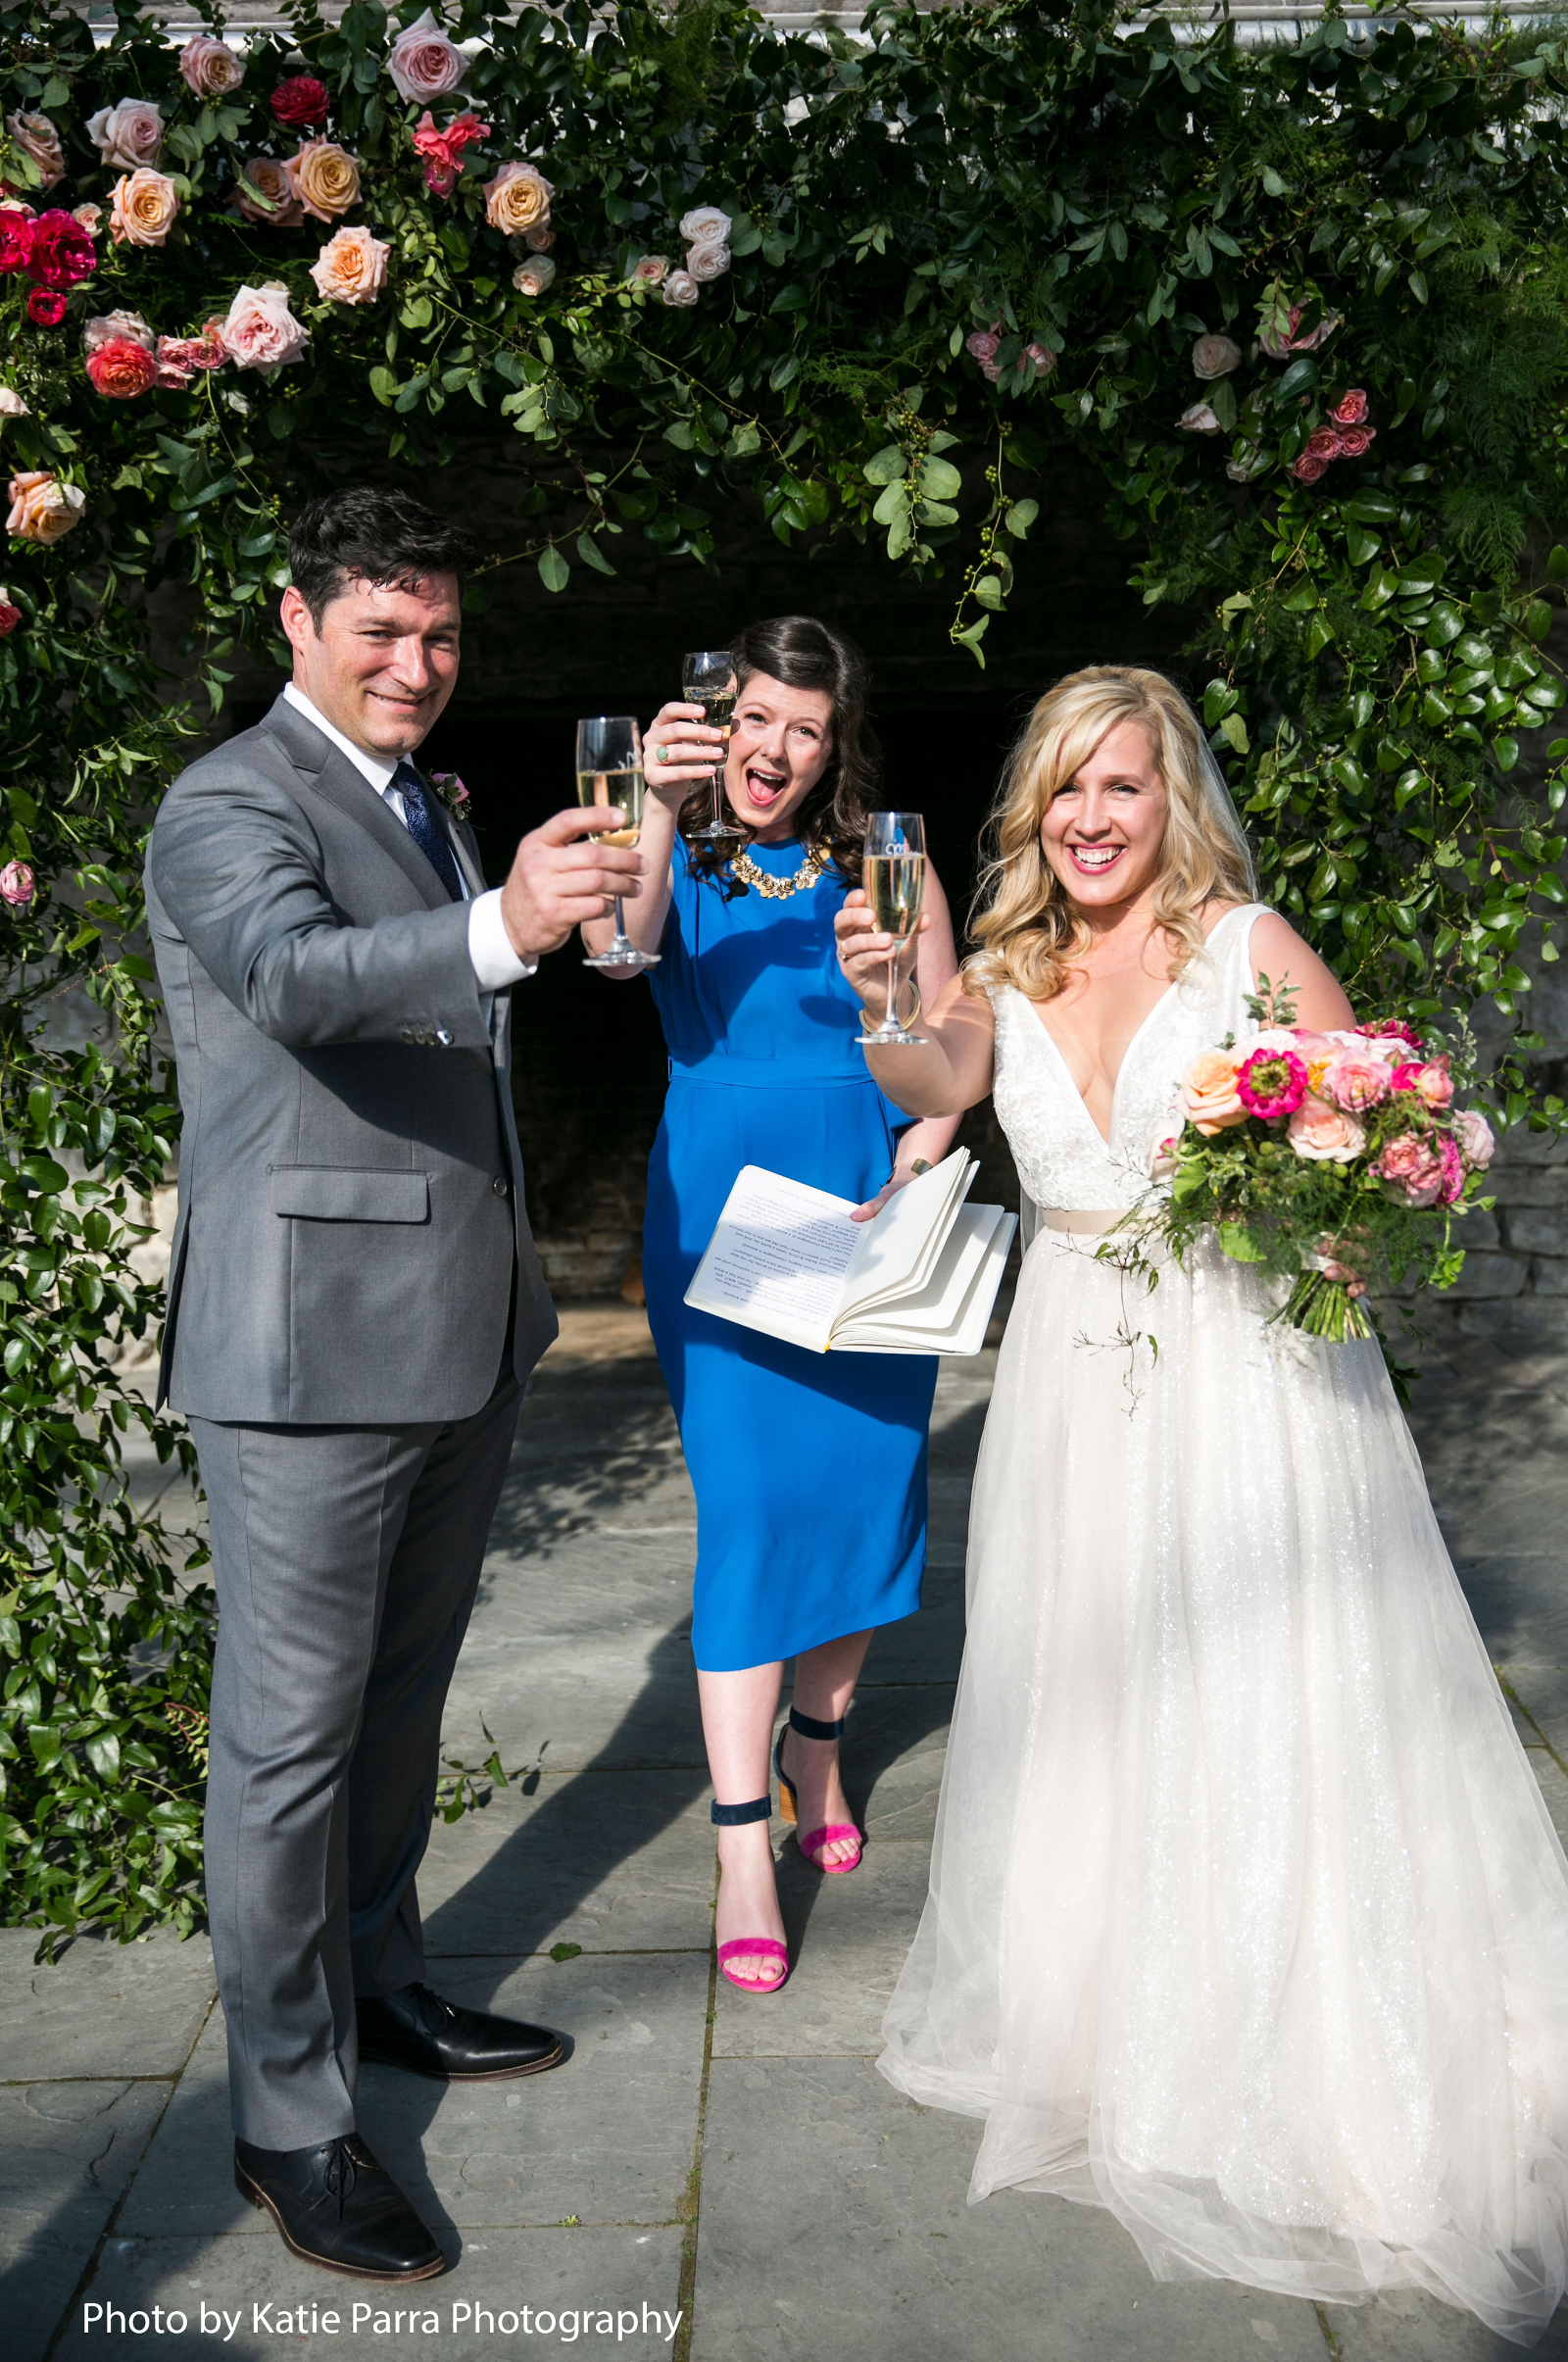 Chris & Barbie's 2019 Wedding at Roche Harbor with planner, officiant and favorite friend Megan Clark